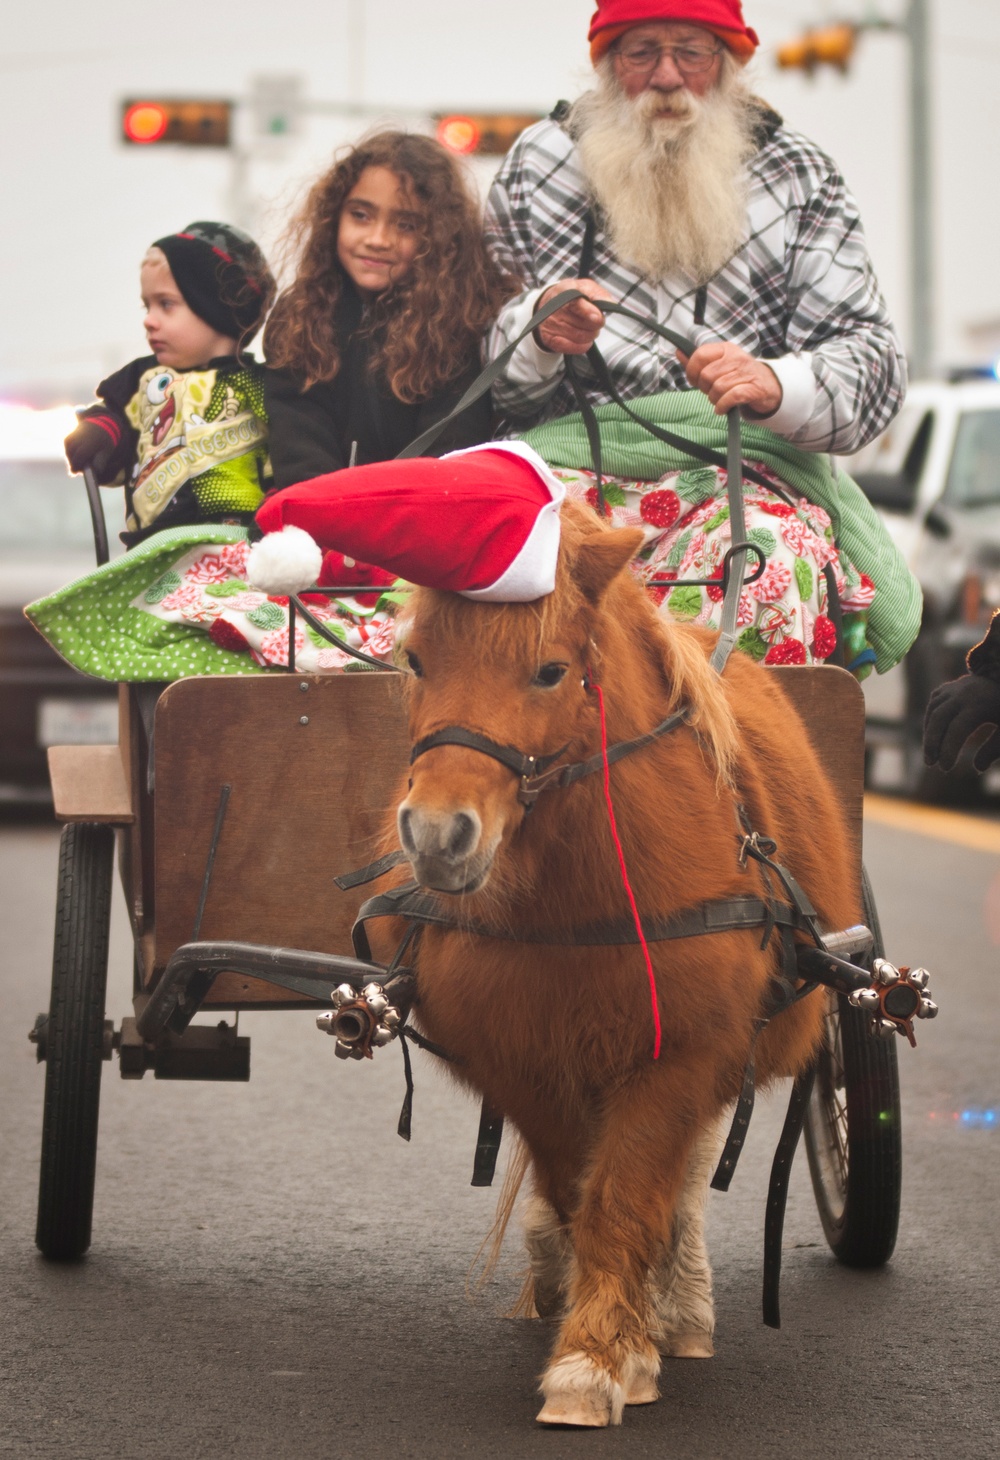 Armed Services YMCA sponsors Children's Christmas Parade